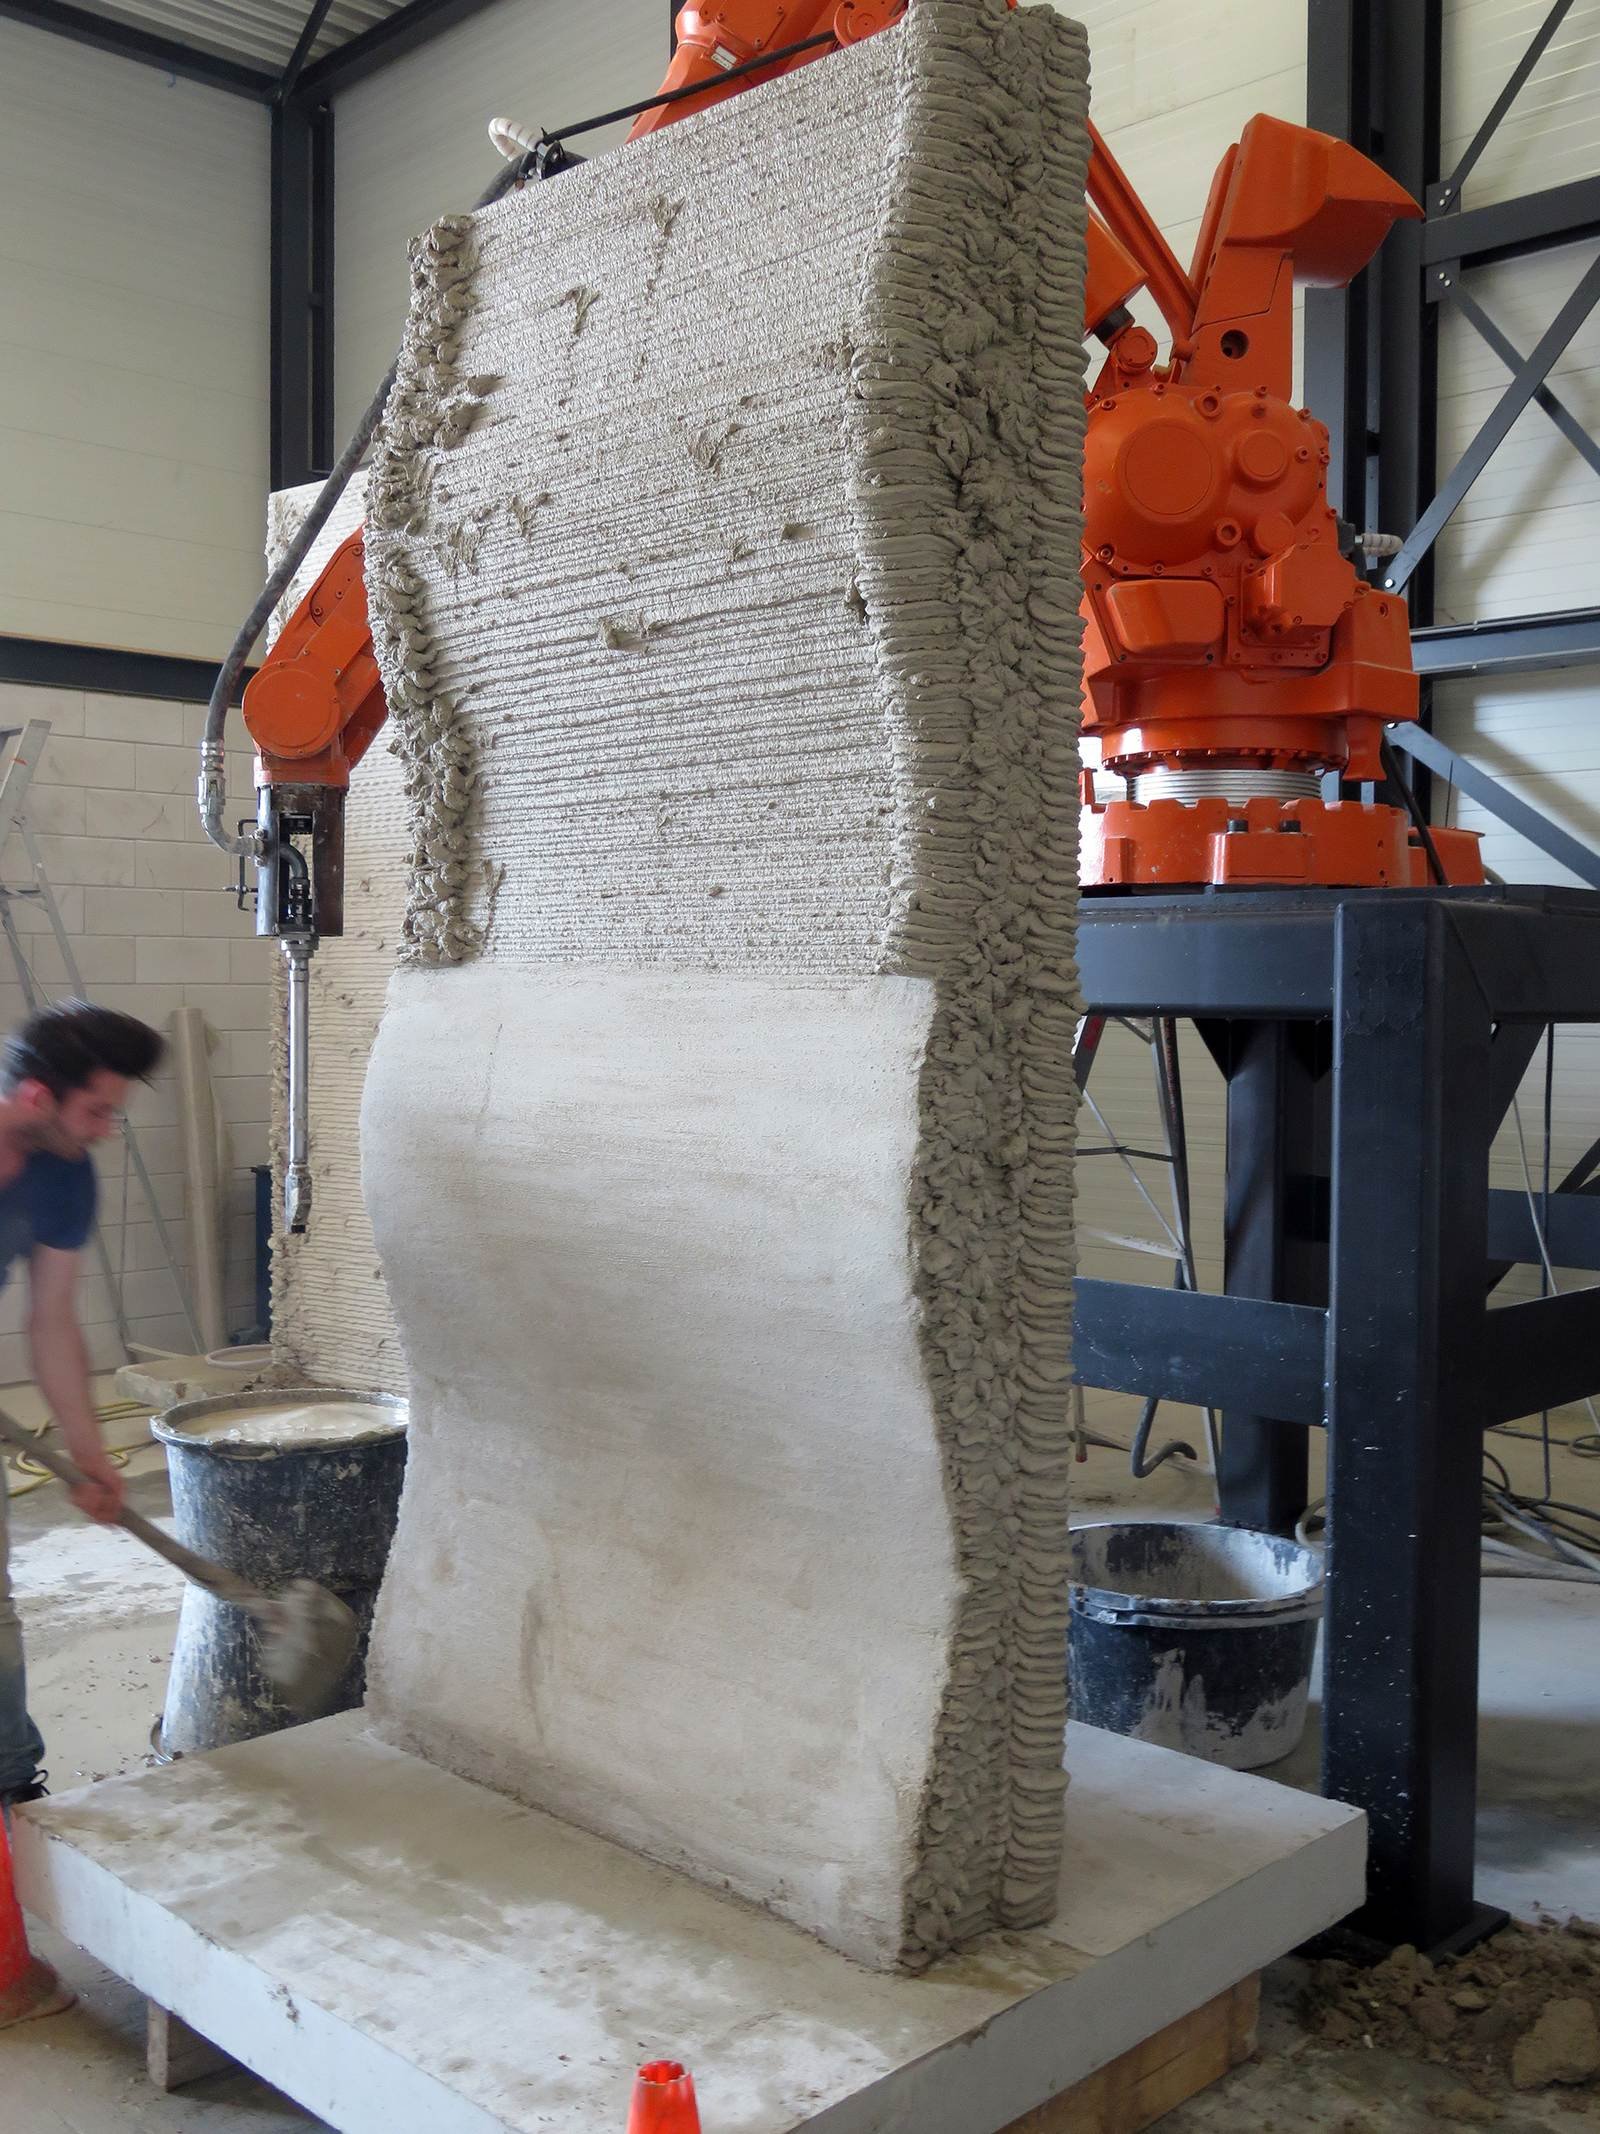  Another 3D printed concrete formwork by Heijmans; this one has the lower surface manually smoothed 